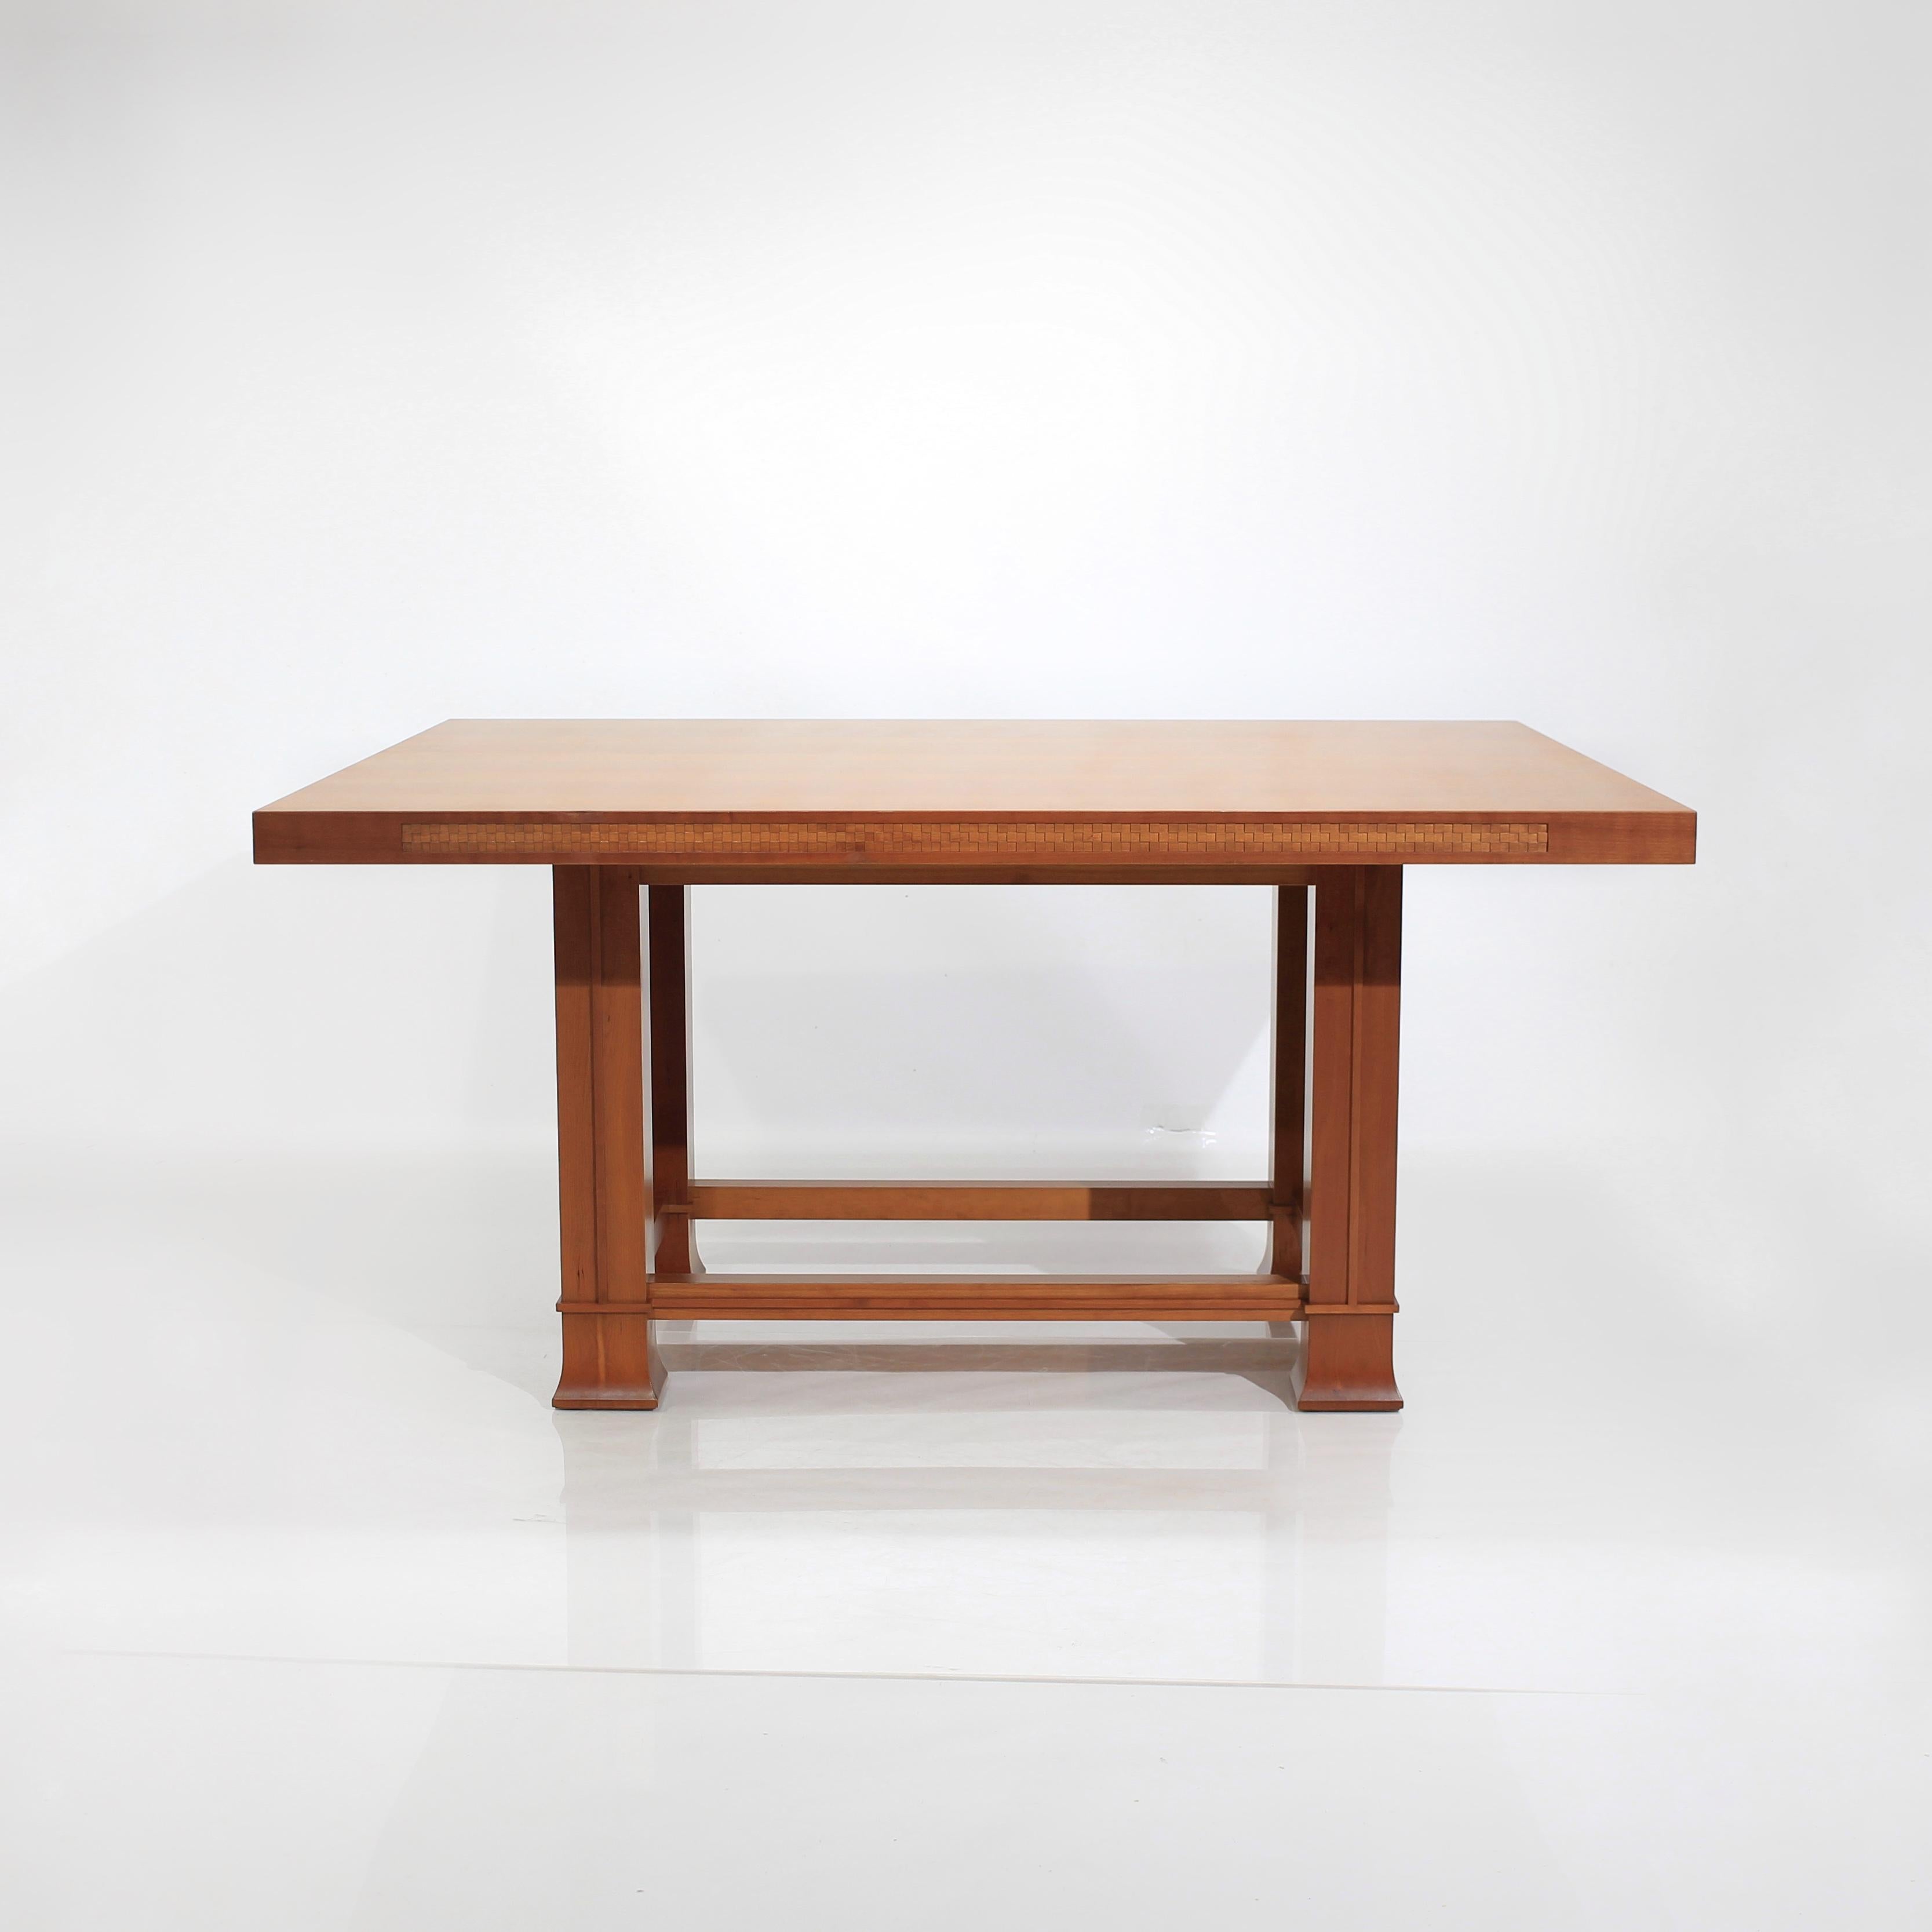 Italian Frank Lloyd Wright Rectangle Dining Table Husser 615 by Cassina